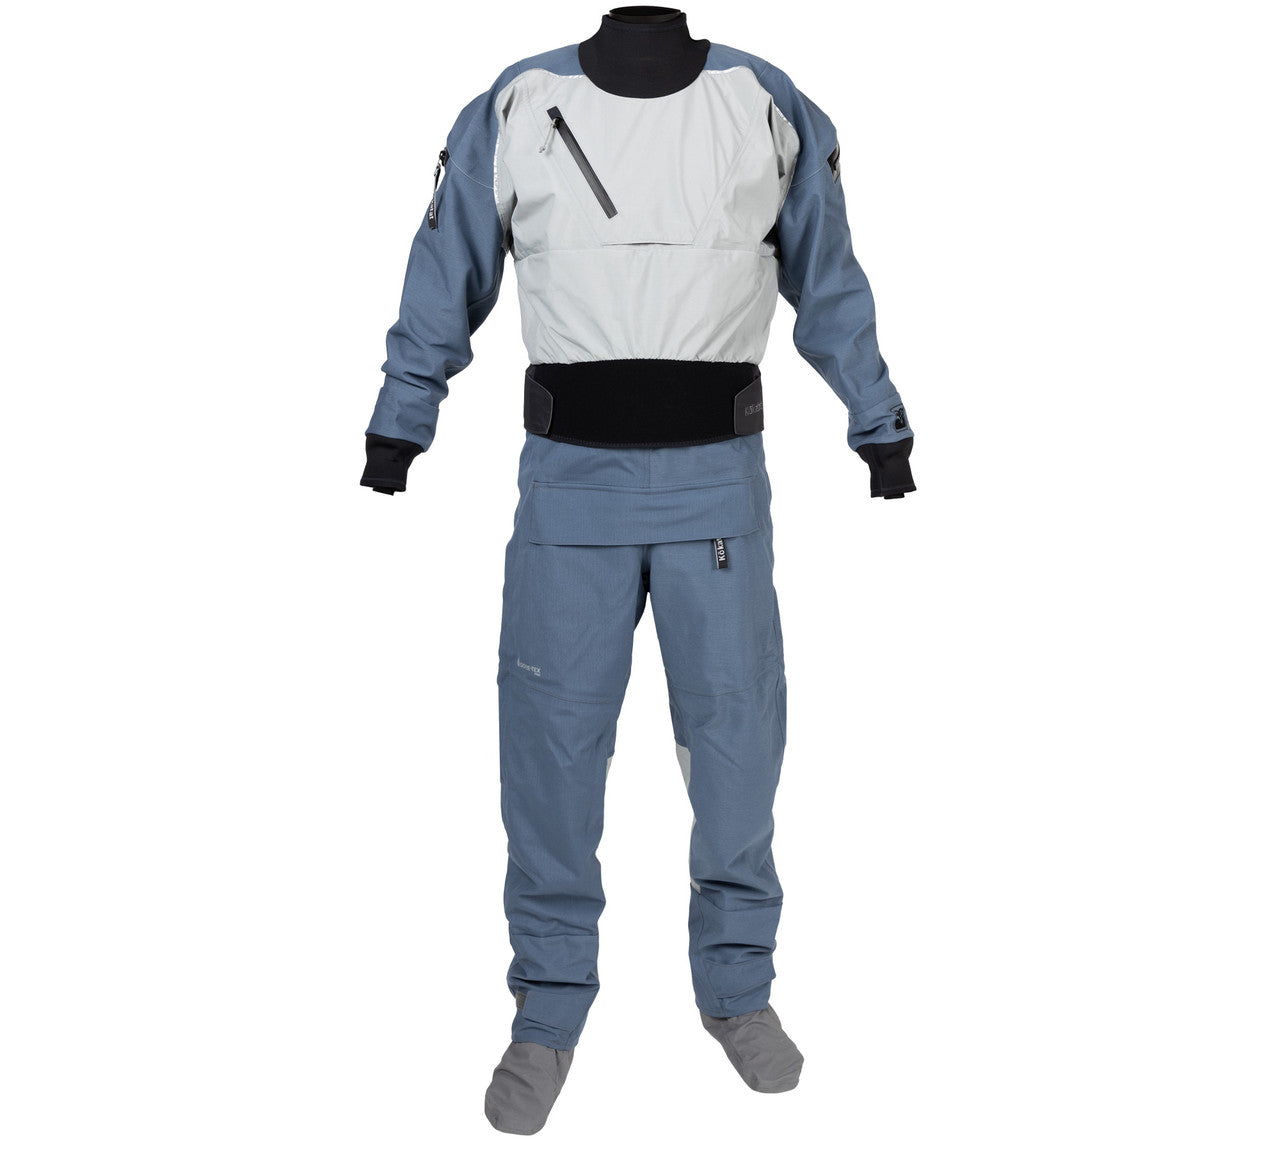 A man in a blue and white Kokatat Retro Icon (GORE-TEX) Drysuit is standing on a mannequin.